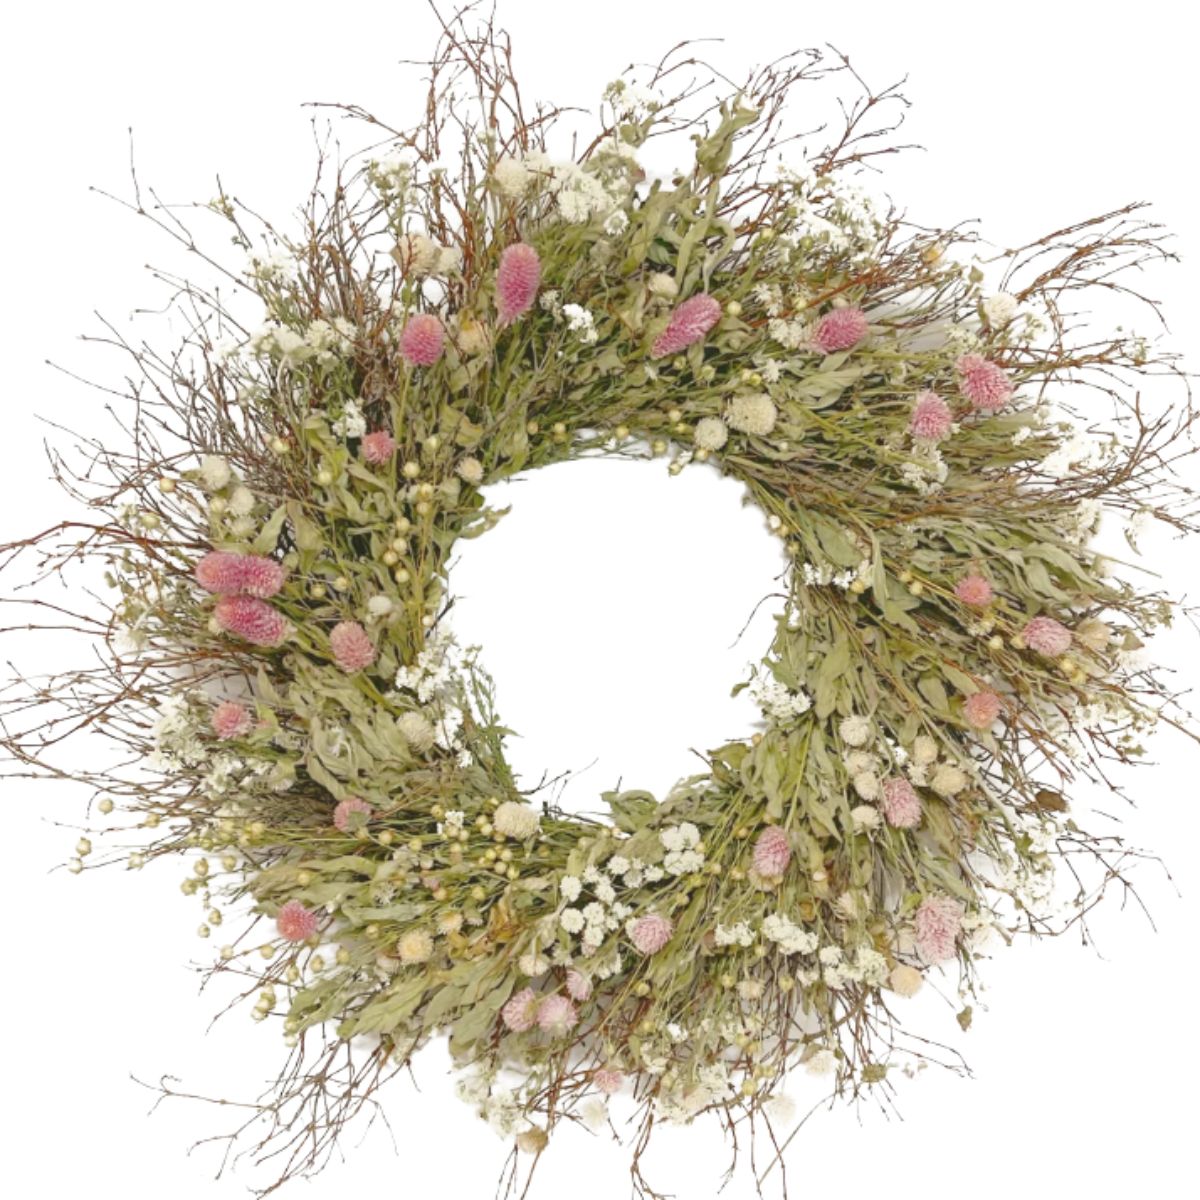 Wreath made of quail brush twigs and globe amaranth from etsy.